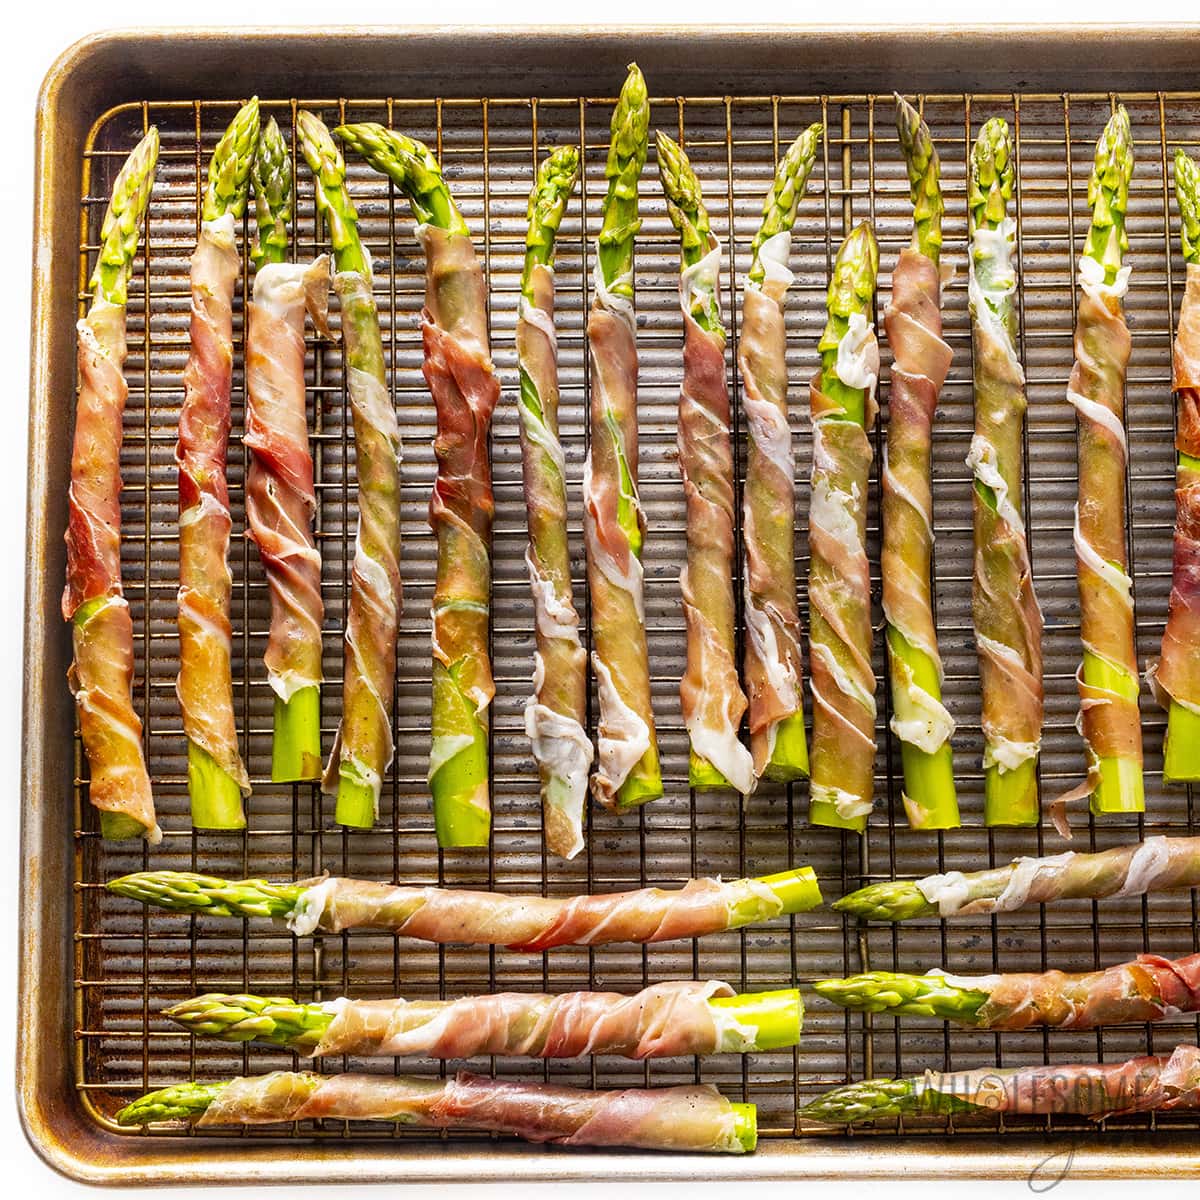 Asparagus wrapped with prosciutto on a baking sheet.